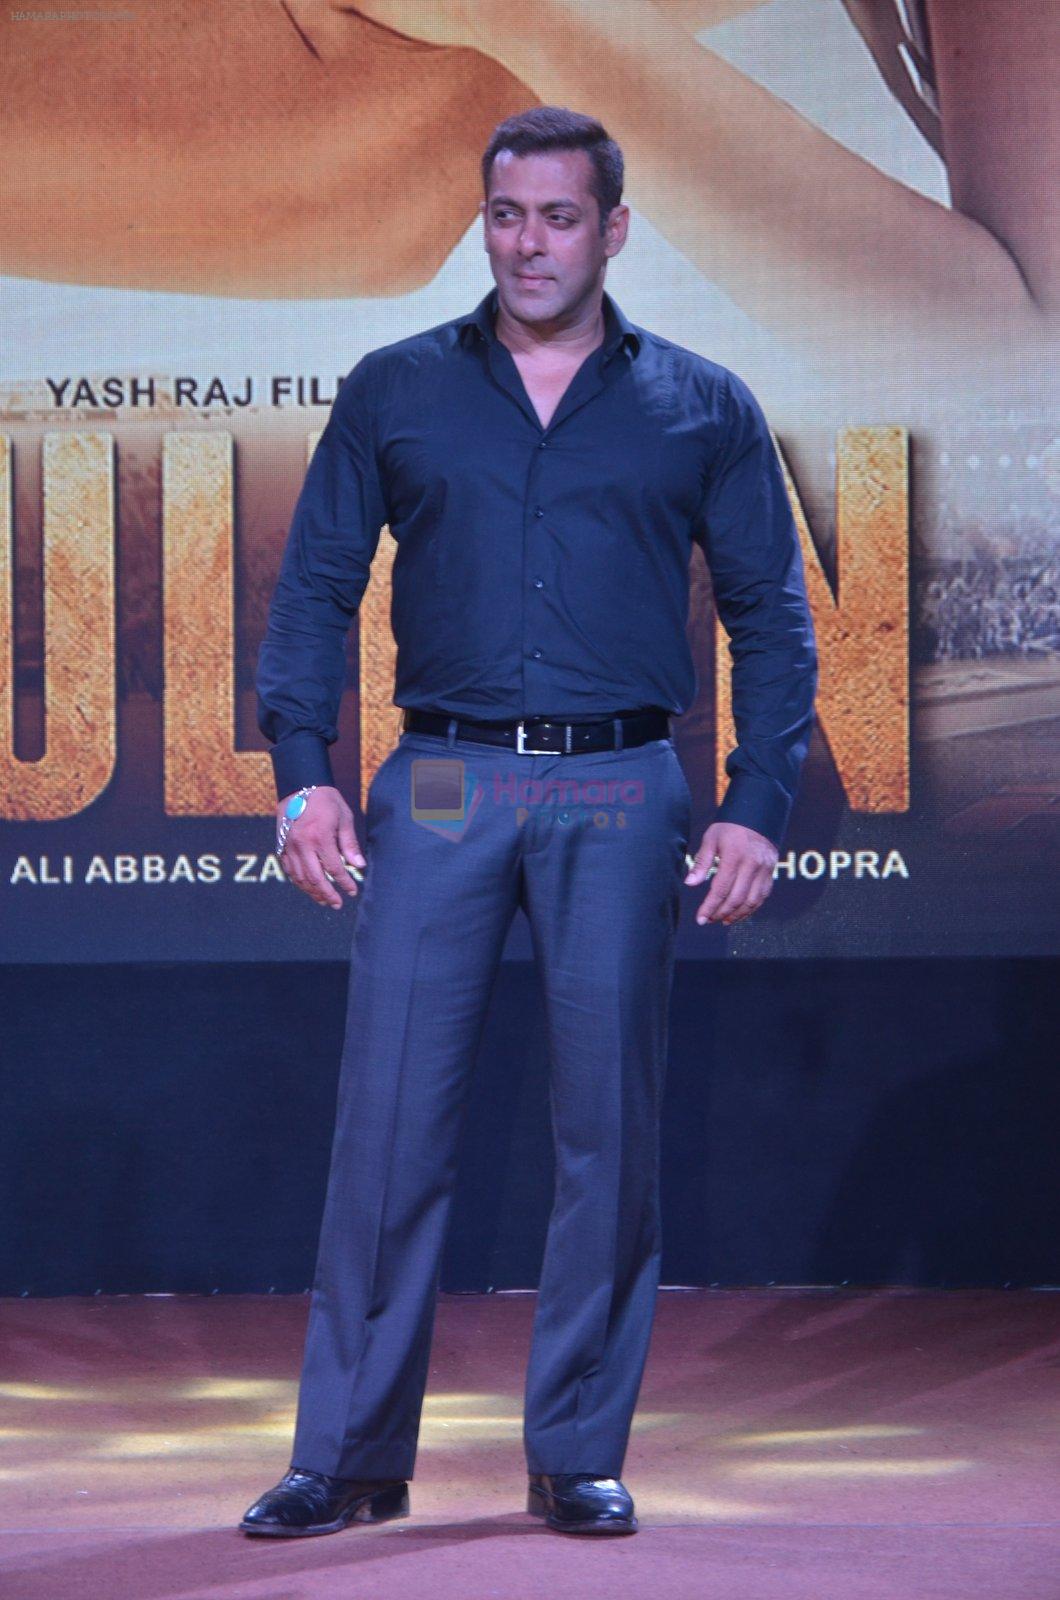 Salman Khan at Sultan Trailer Launch on 24th May 2016